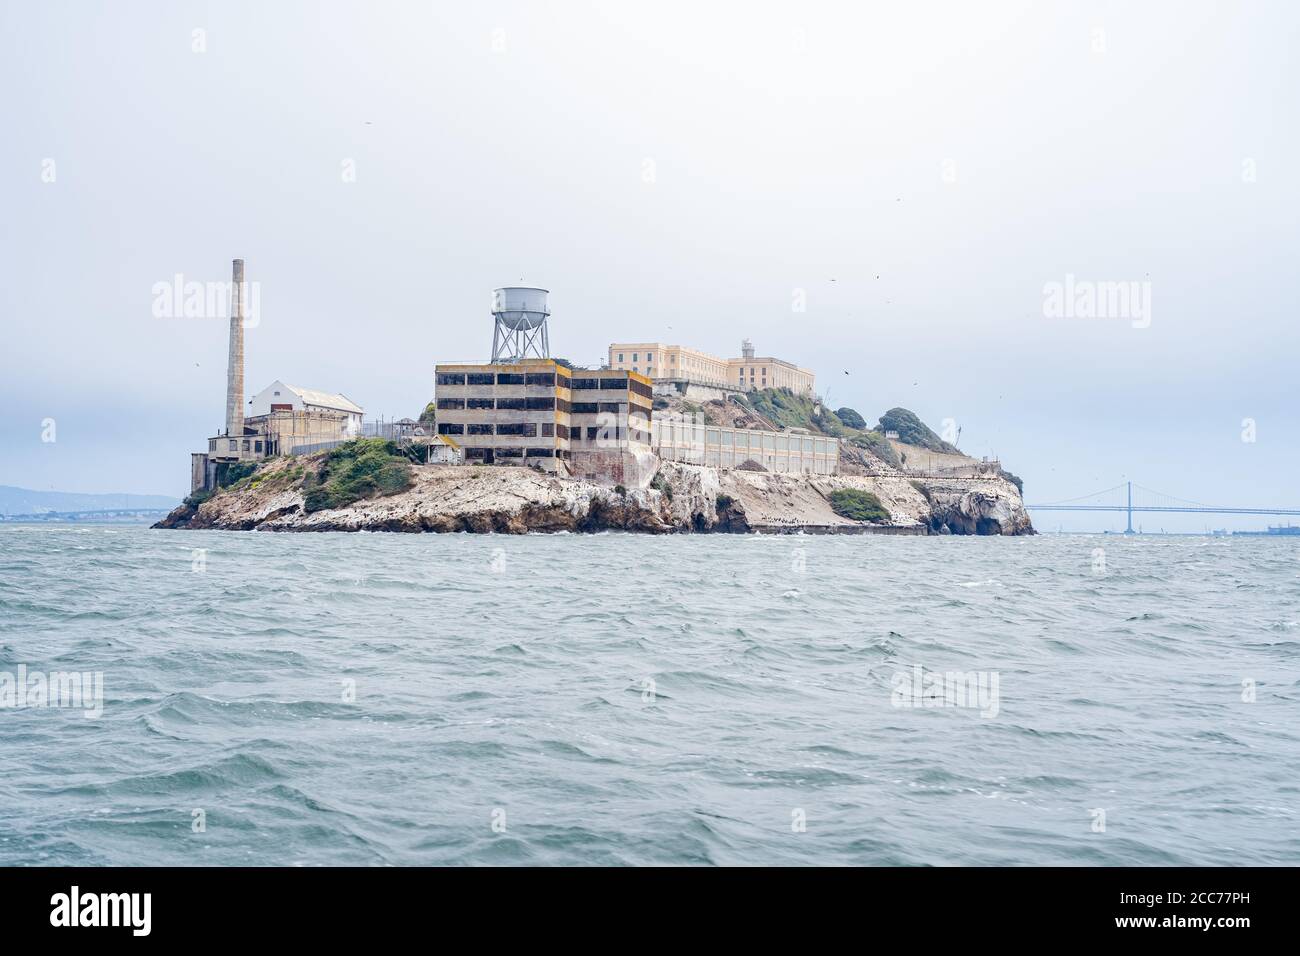 Alcatraz Island, formerly housed a high-security prison now it is a National historic landmark open for tours in San Francisco, CA Stock Photo